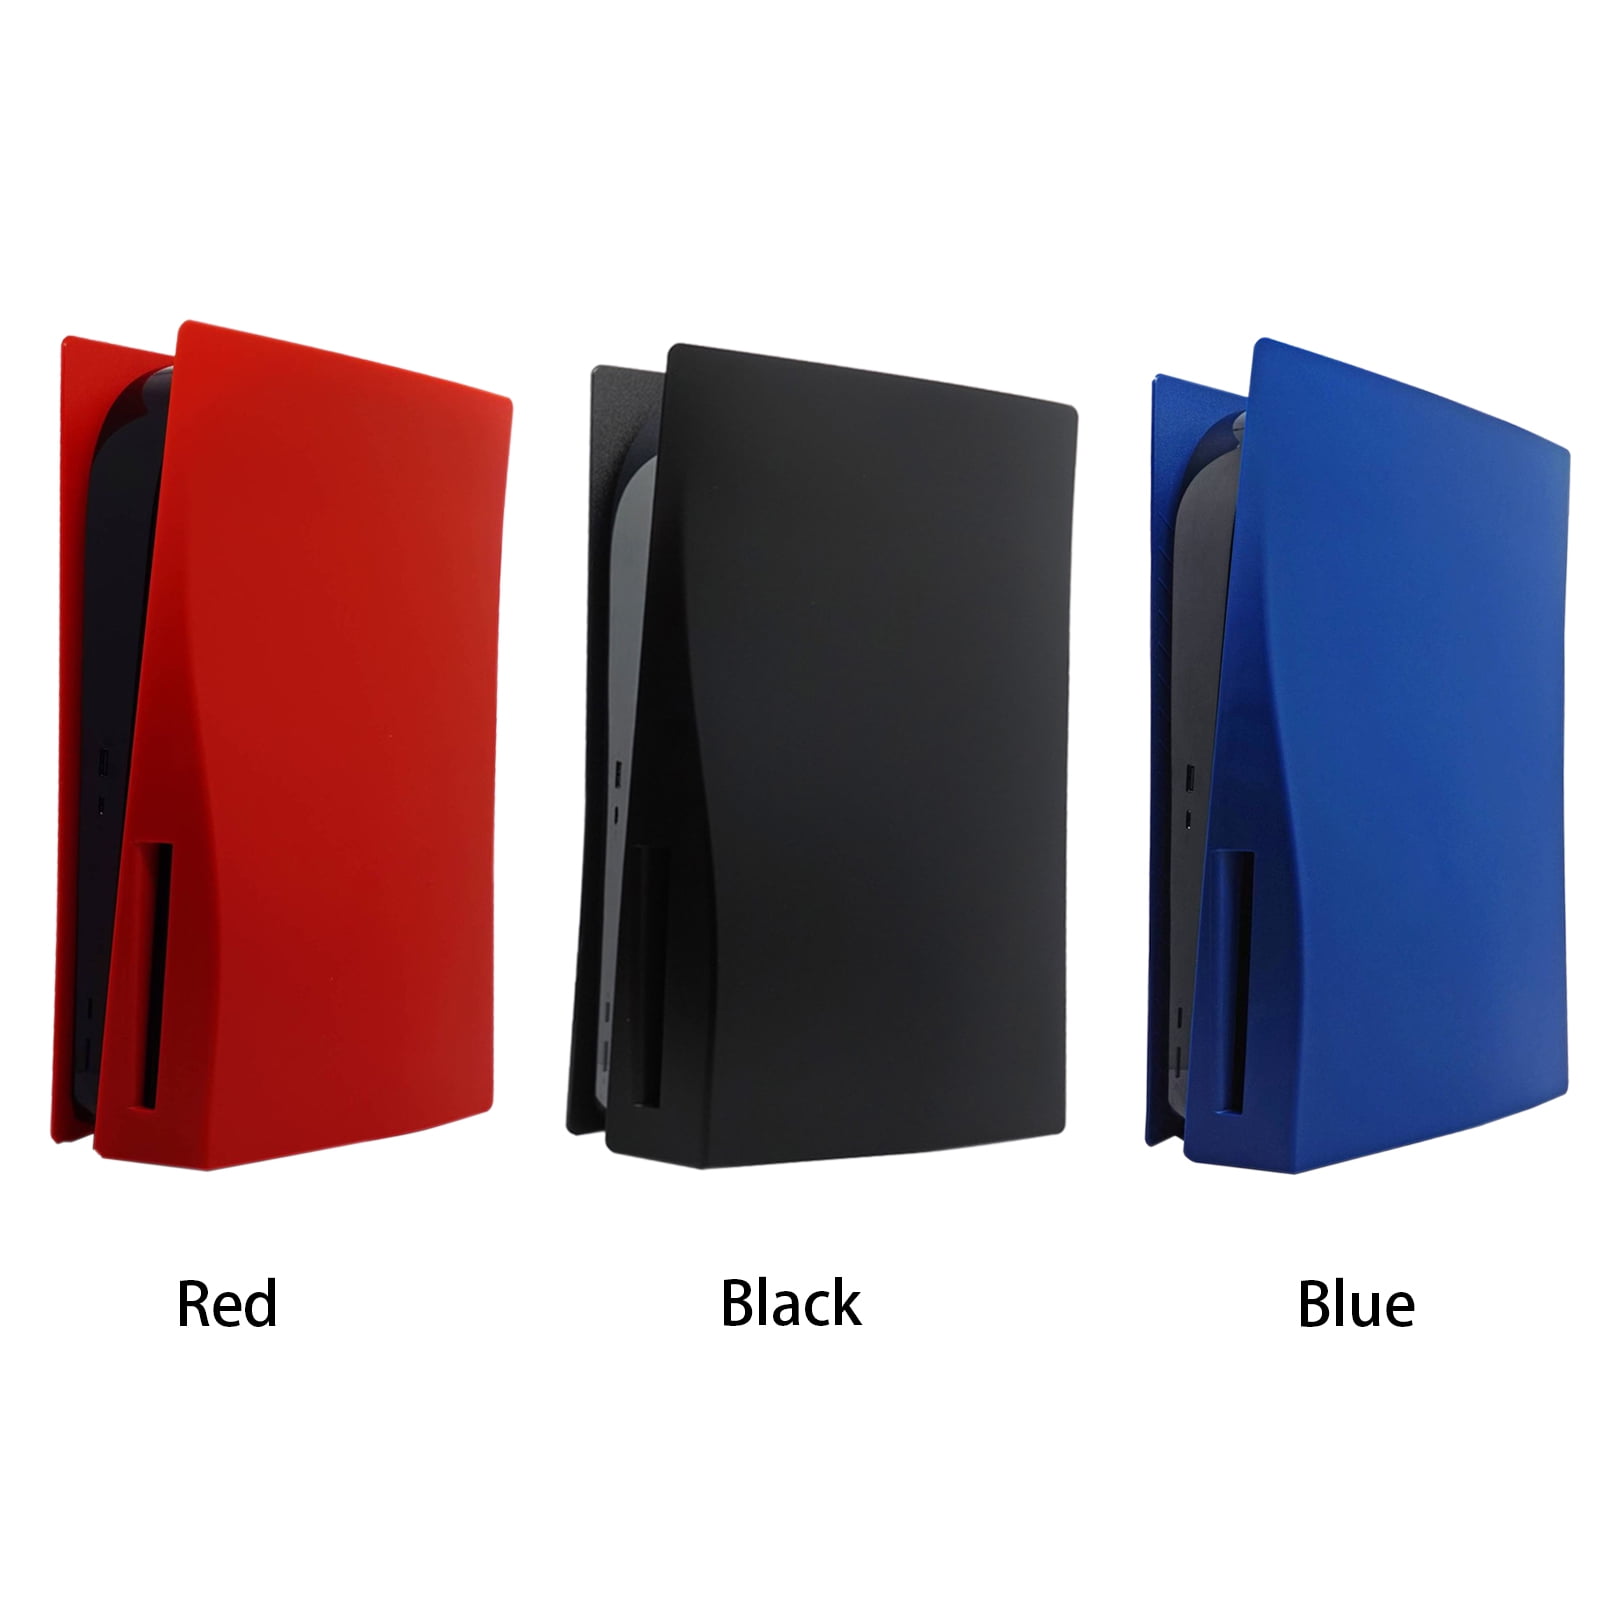 PlayStation 5 console covers  Official PS5 covers made by PlayStation (US)